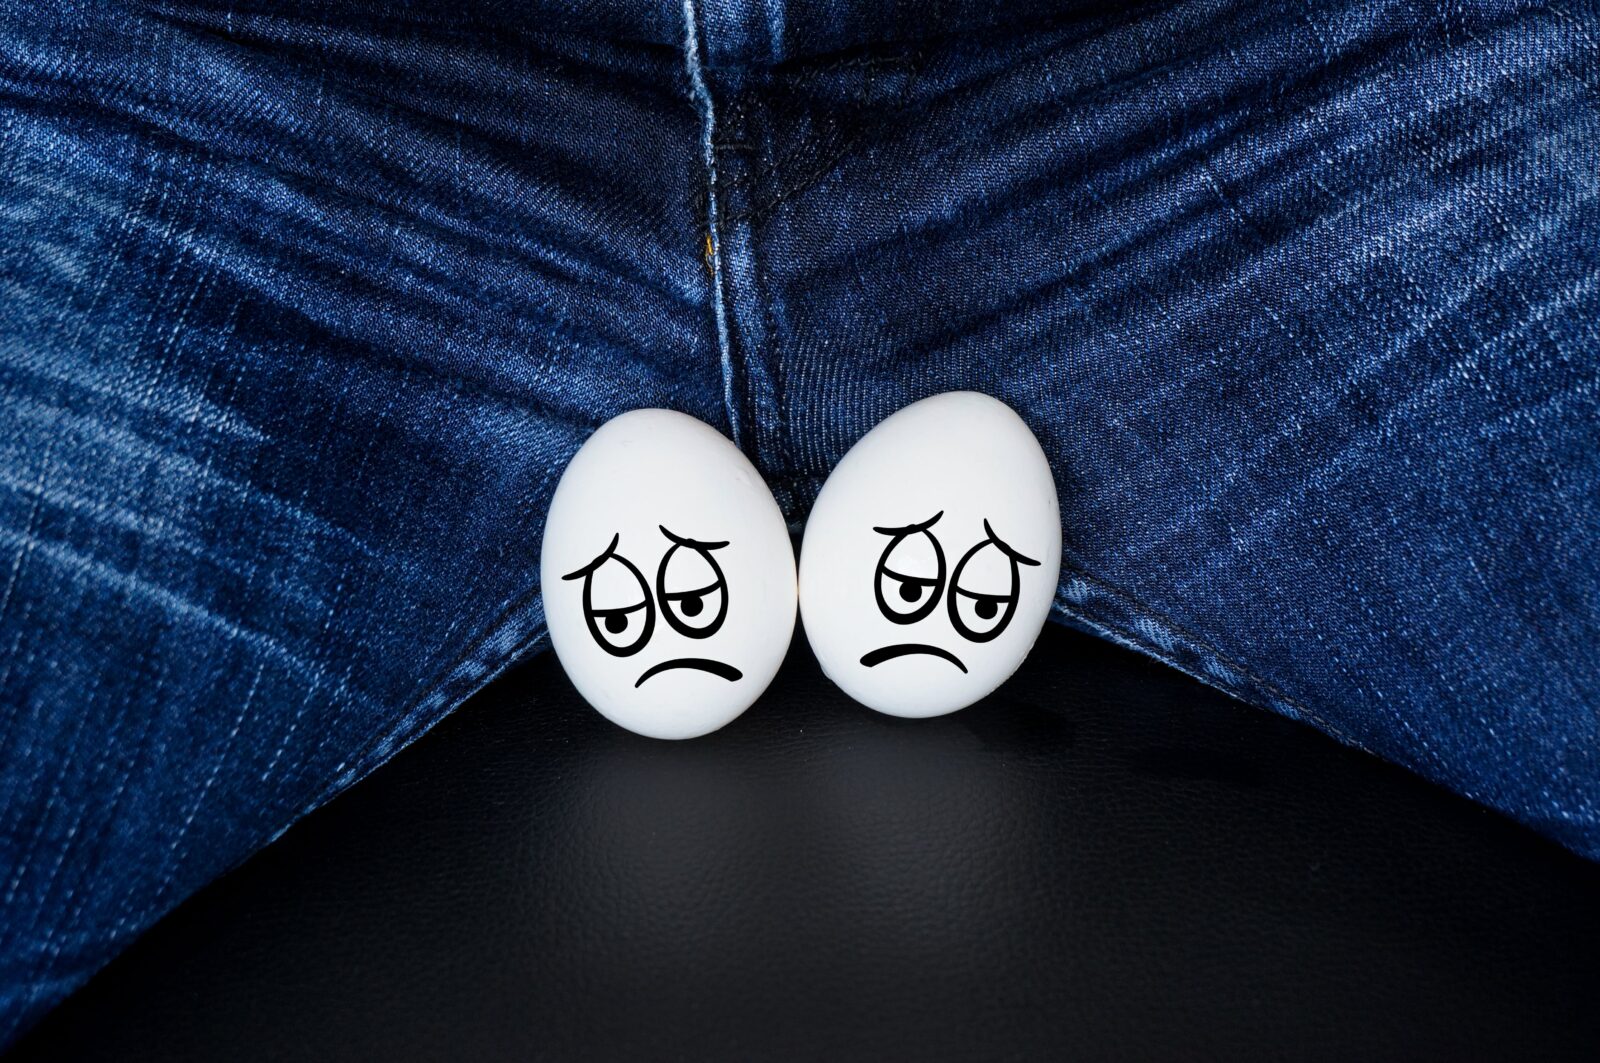 sad faces on white eggs - a symbol of testicles with the comic cartoon faces
